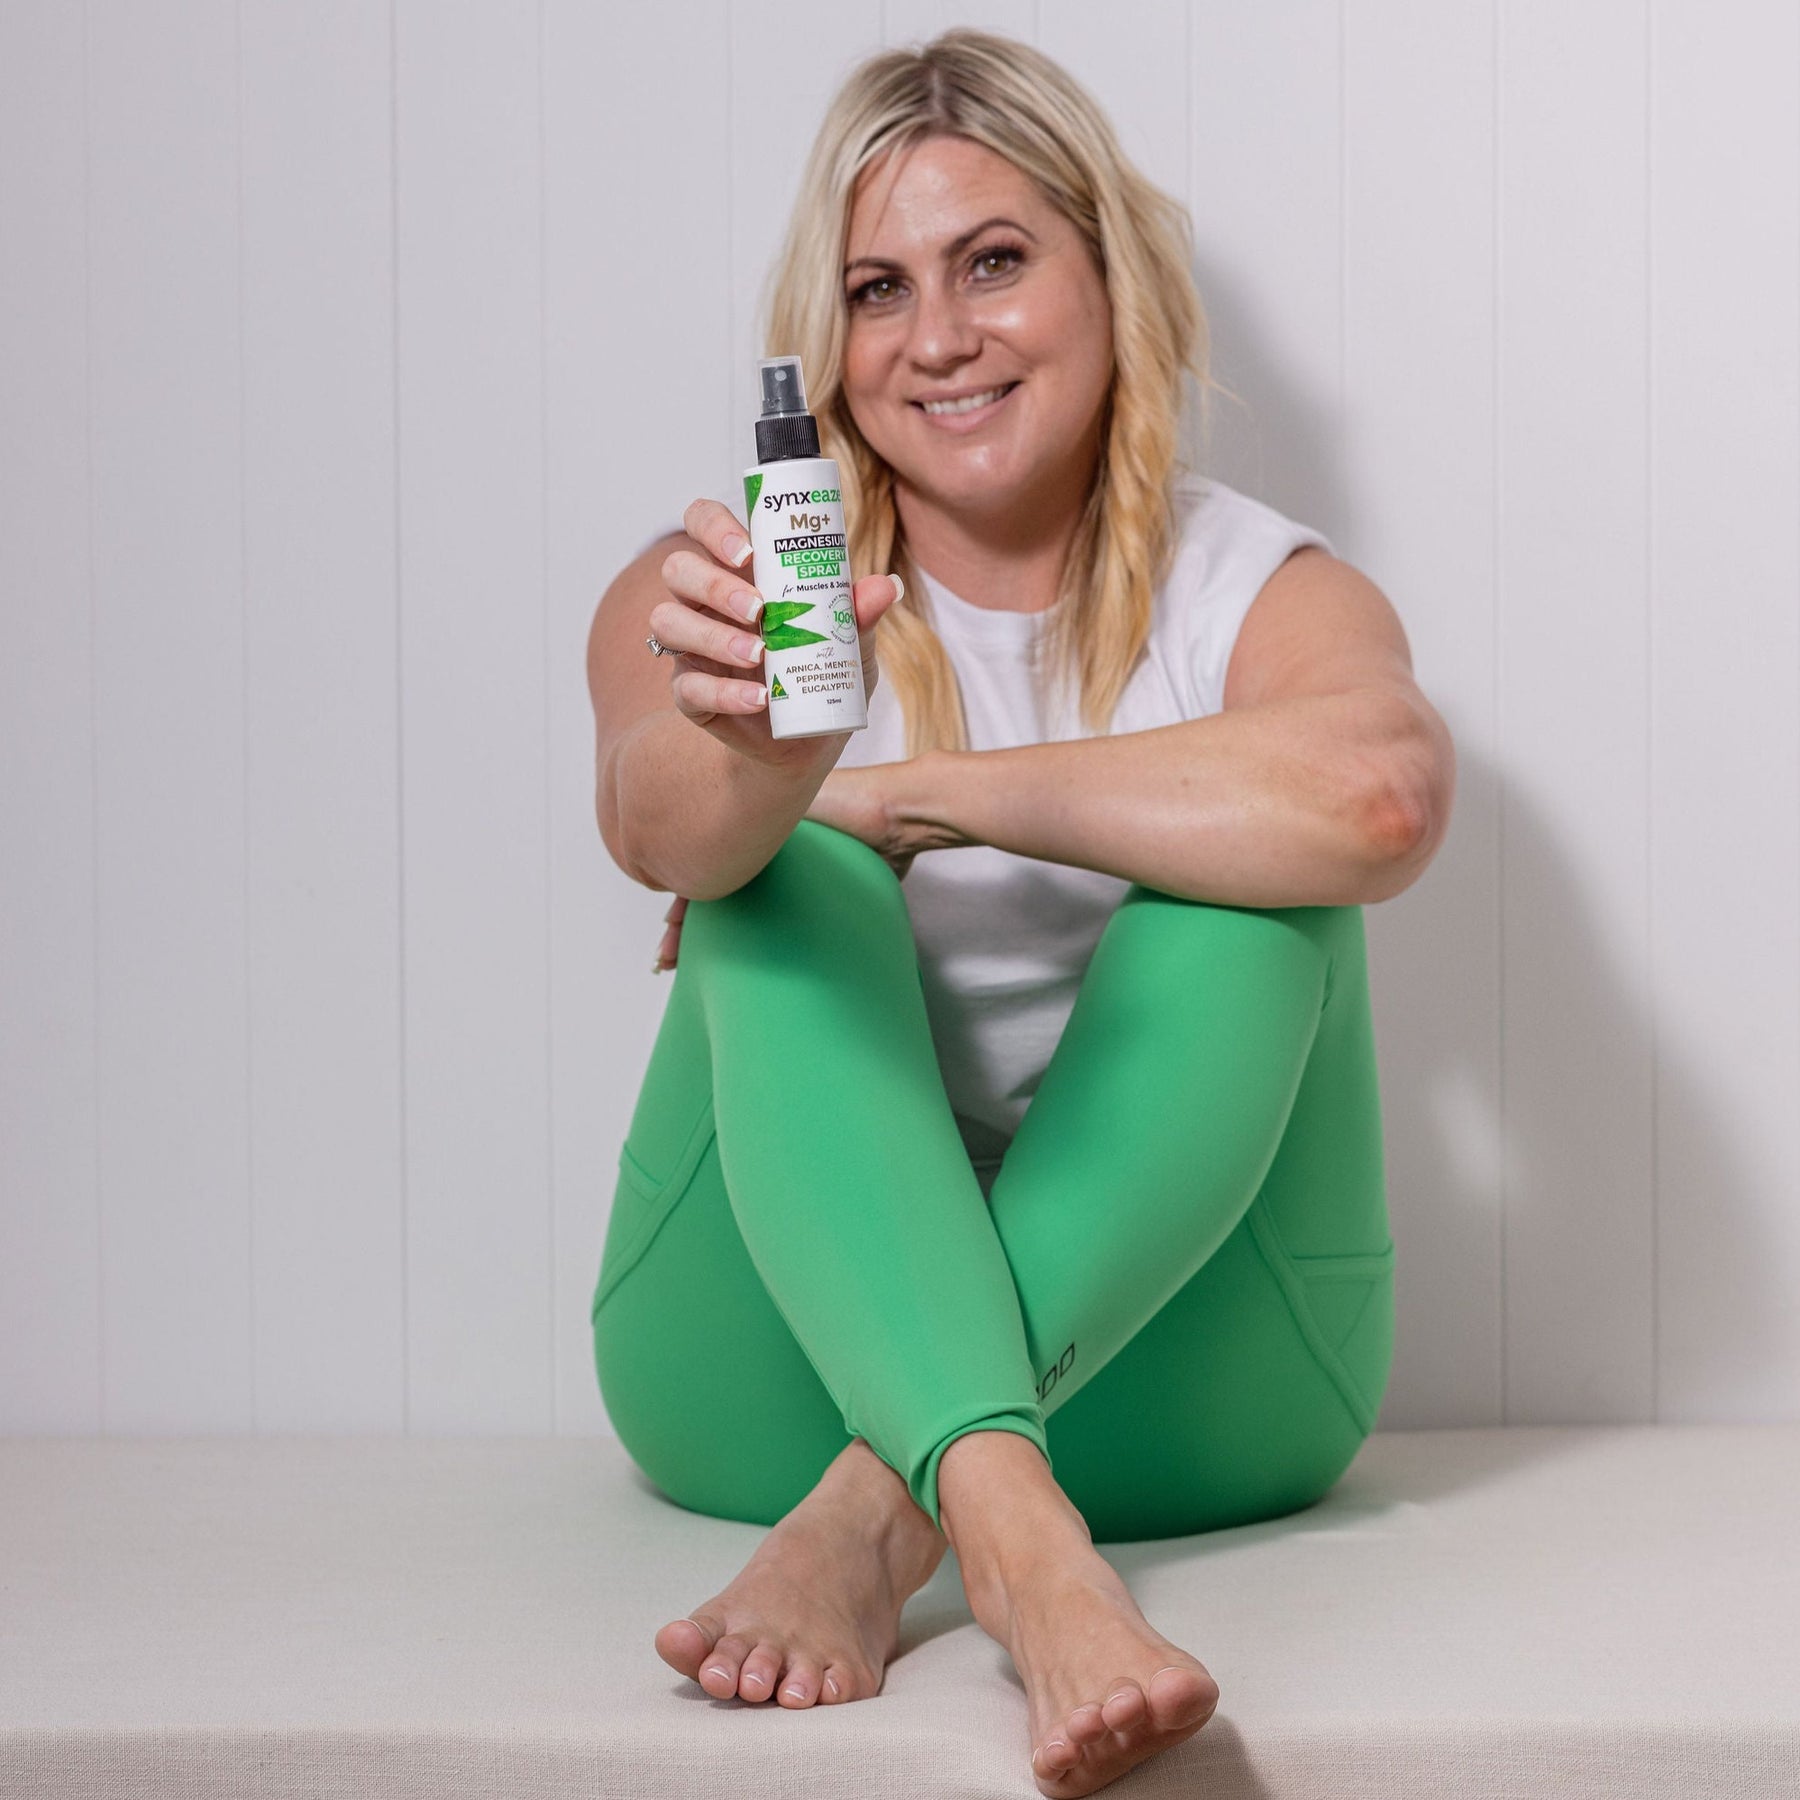 lady holding bottle of synxeaze magnesium spray, active people, maintain flexible and relaxed muscles